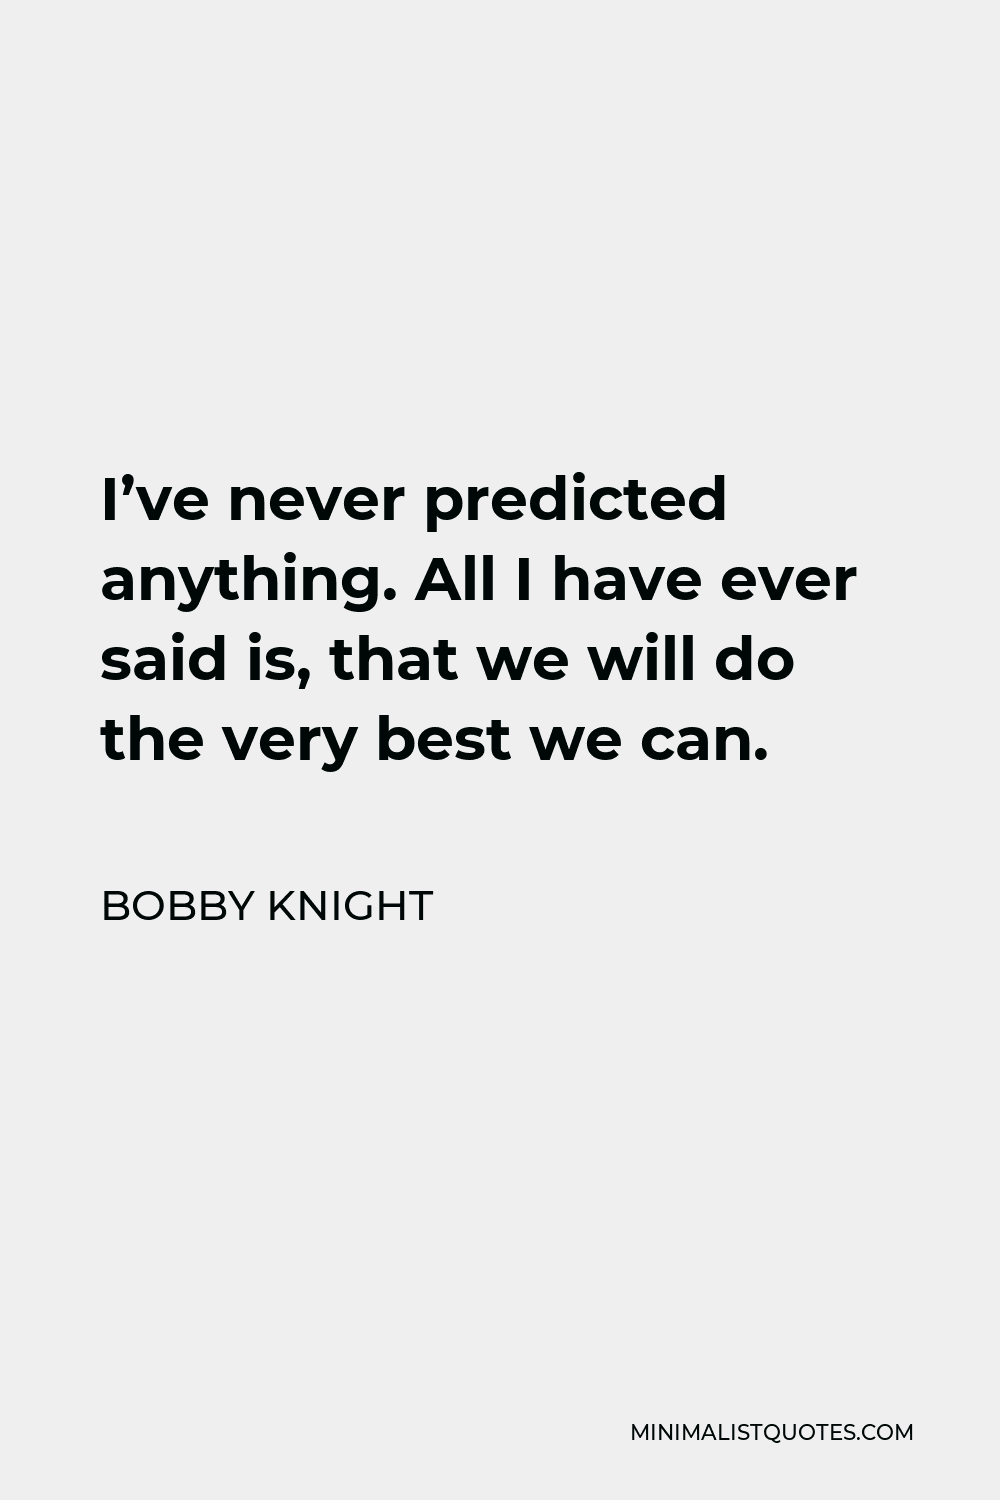 Bobby Knight Quote - I’ve never predicted anything. All I have ever said is, that we will do the very best we can.